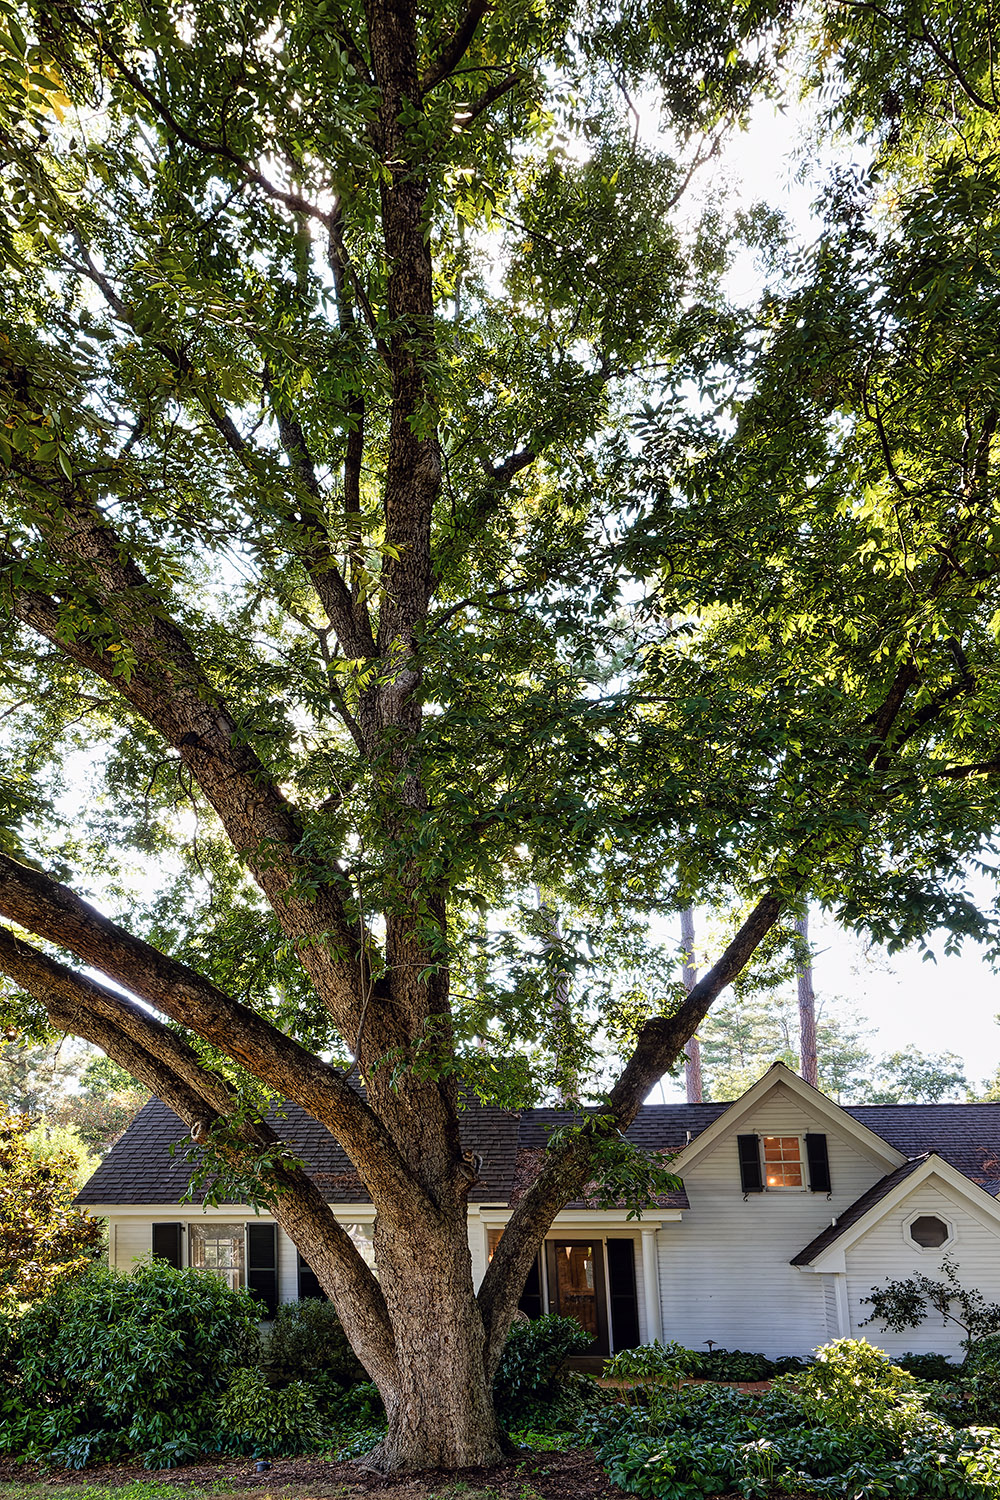 Tree and residence behind Fearrington House